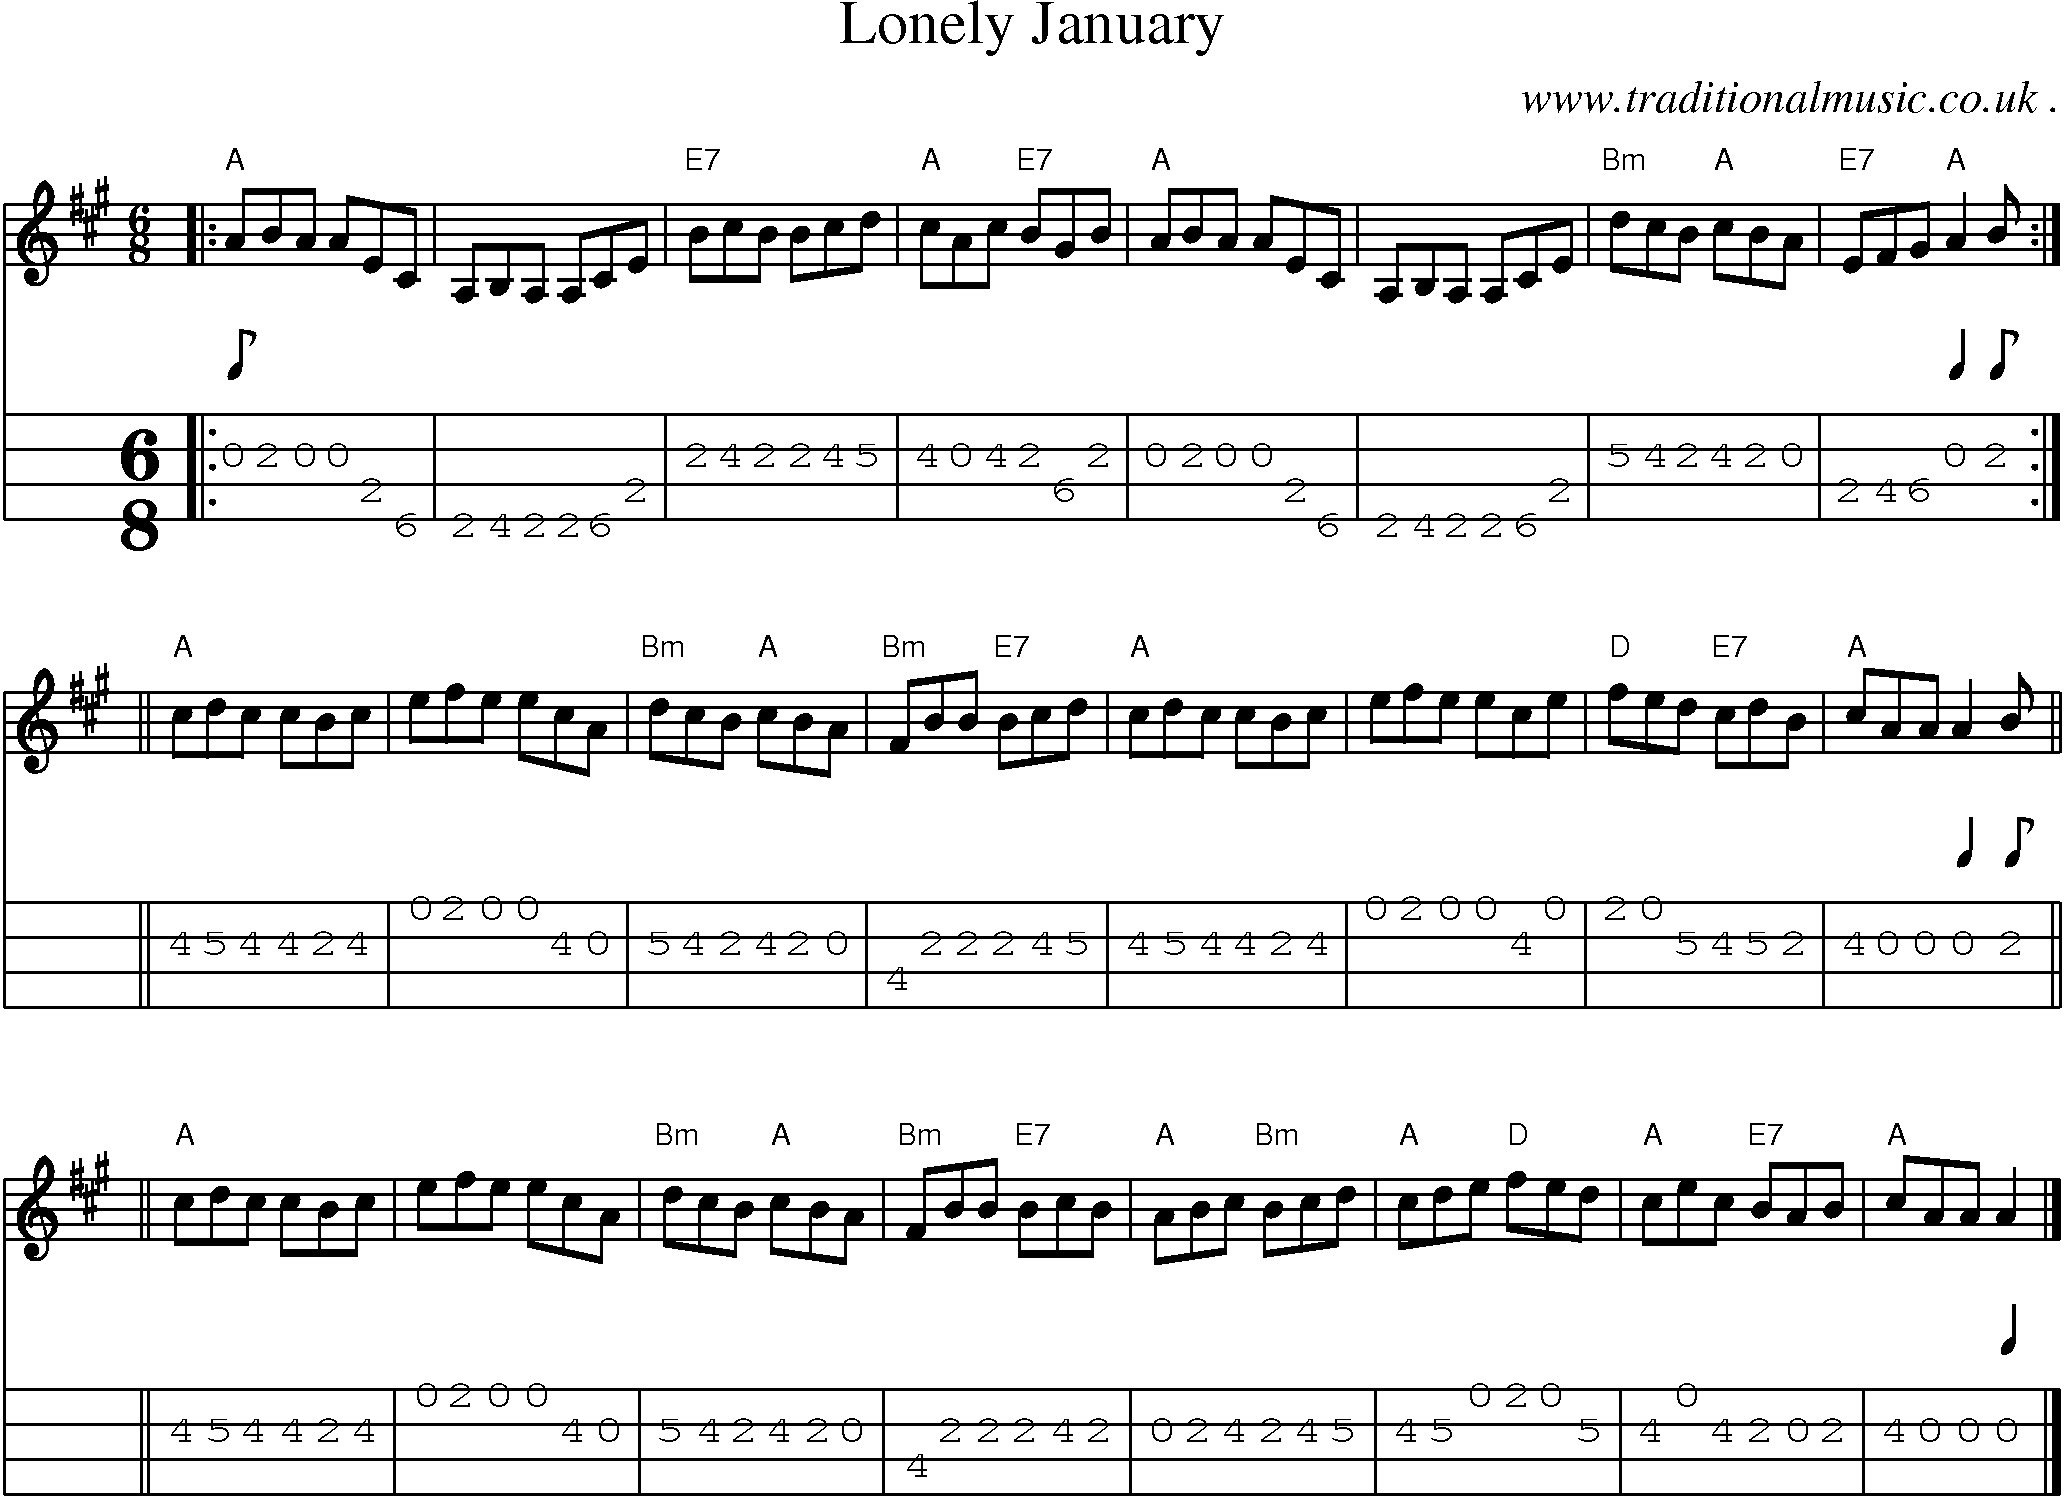 Sheet-music  score, Chords and Mandolin Tabs for Lonely January